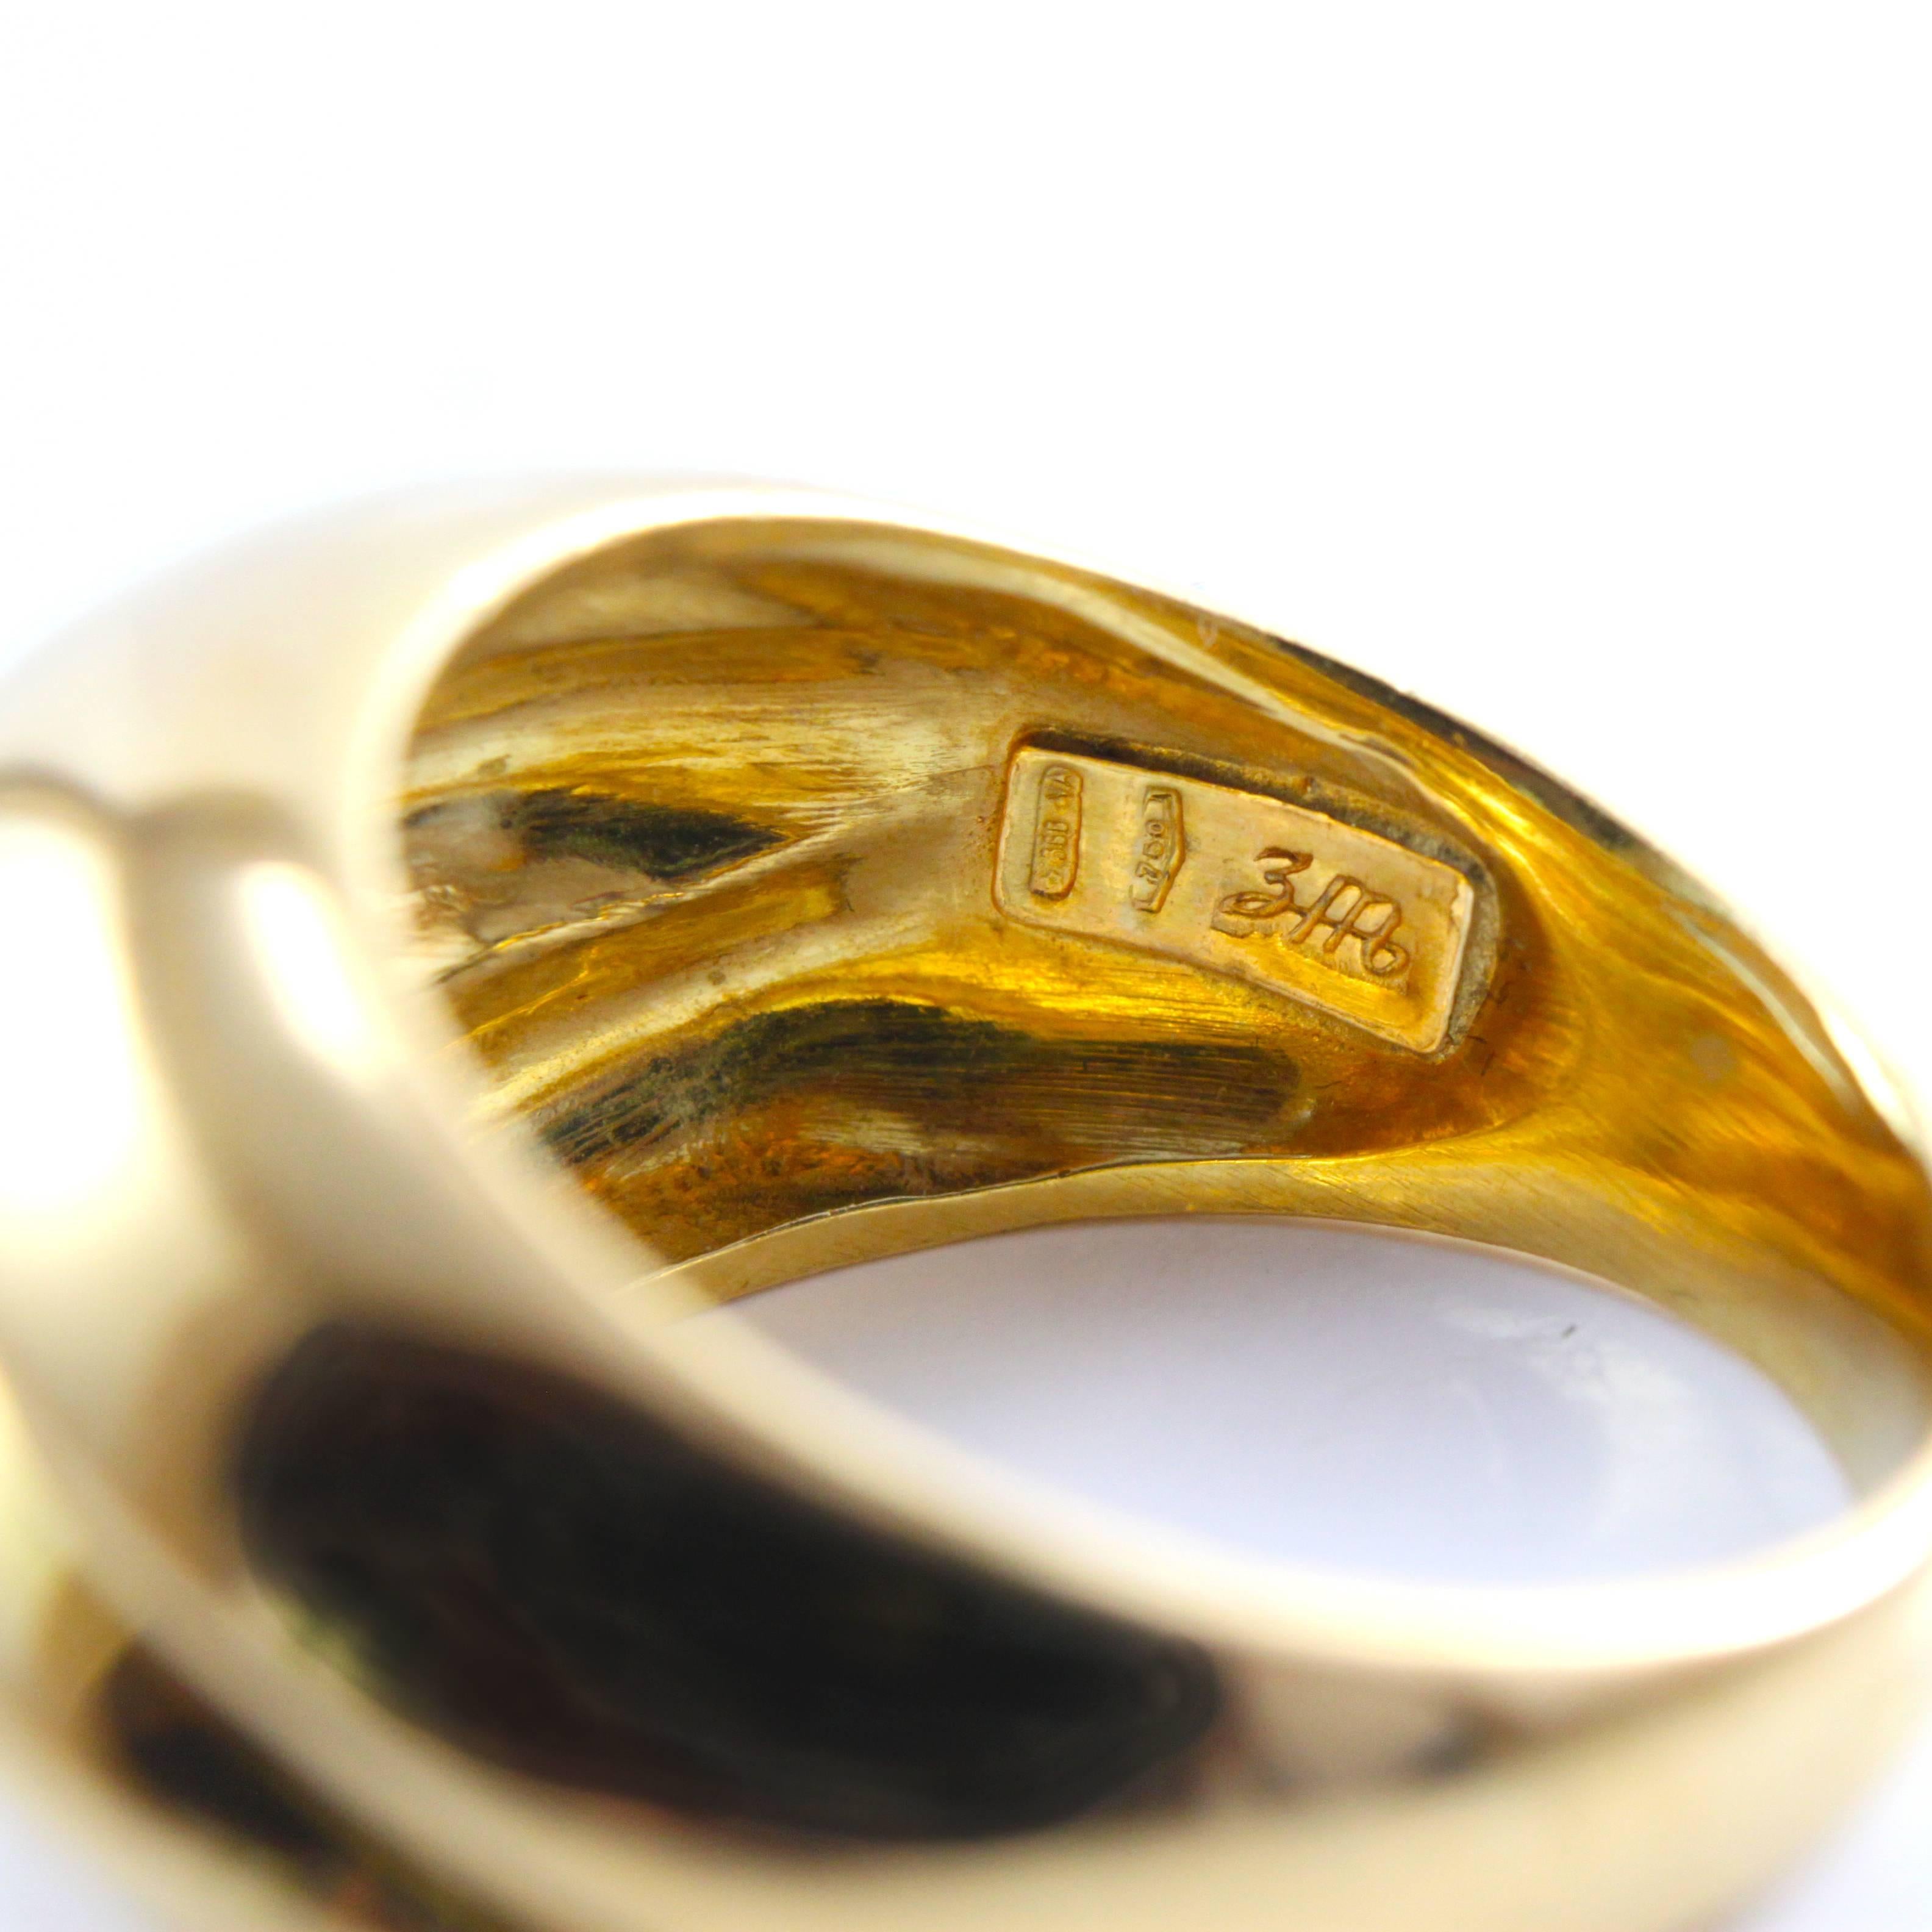 An 18k Gold Ring, ca. 1970s.

The ring has a wave design and is made of 18k gold. It has a very chic and sleek look.
 
Ring size 6 (can be altered).